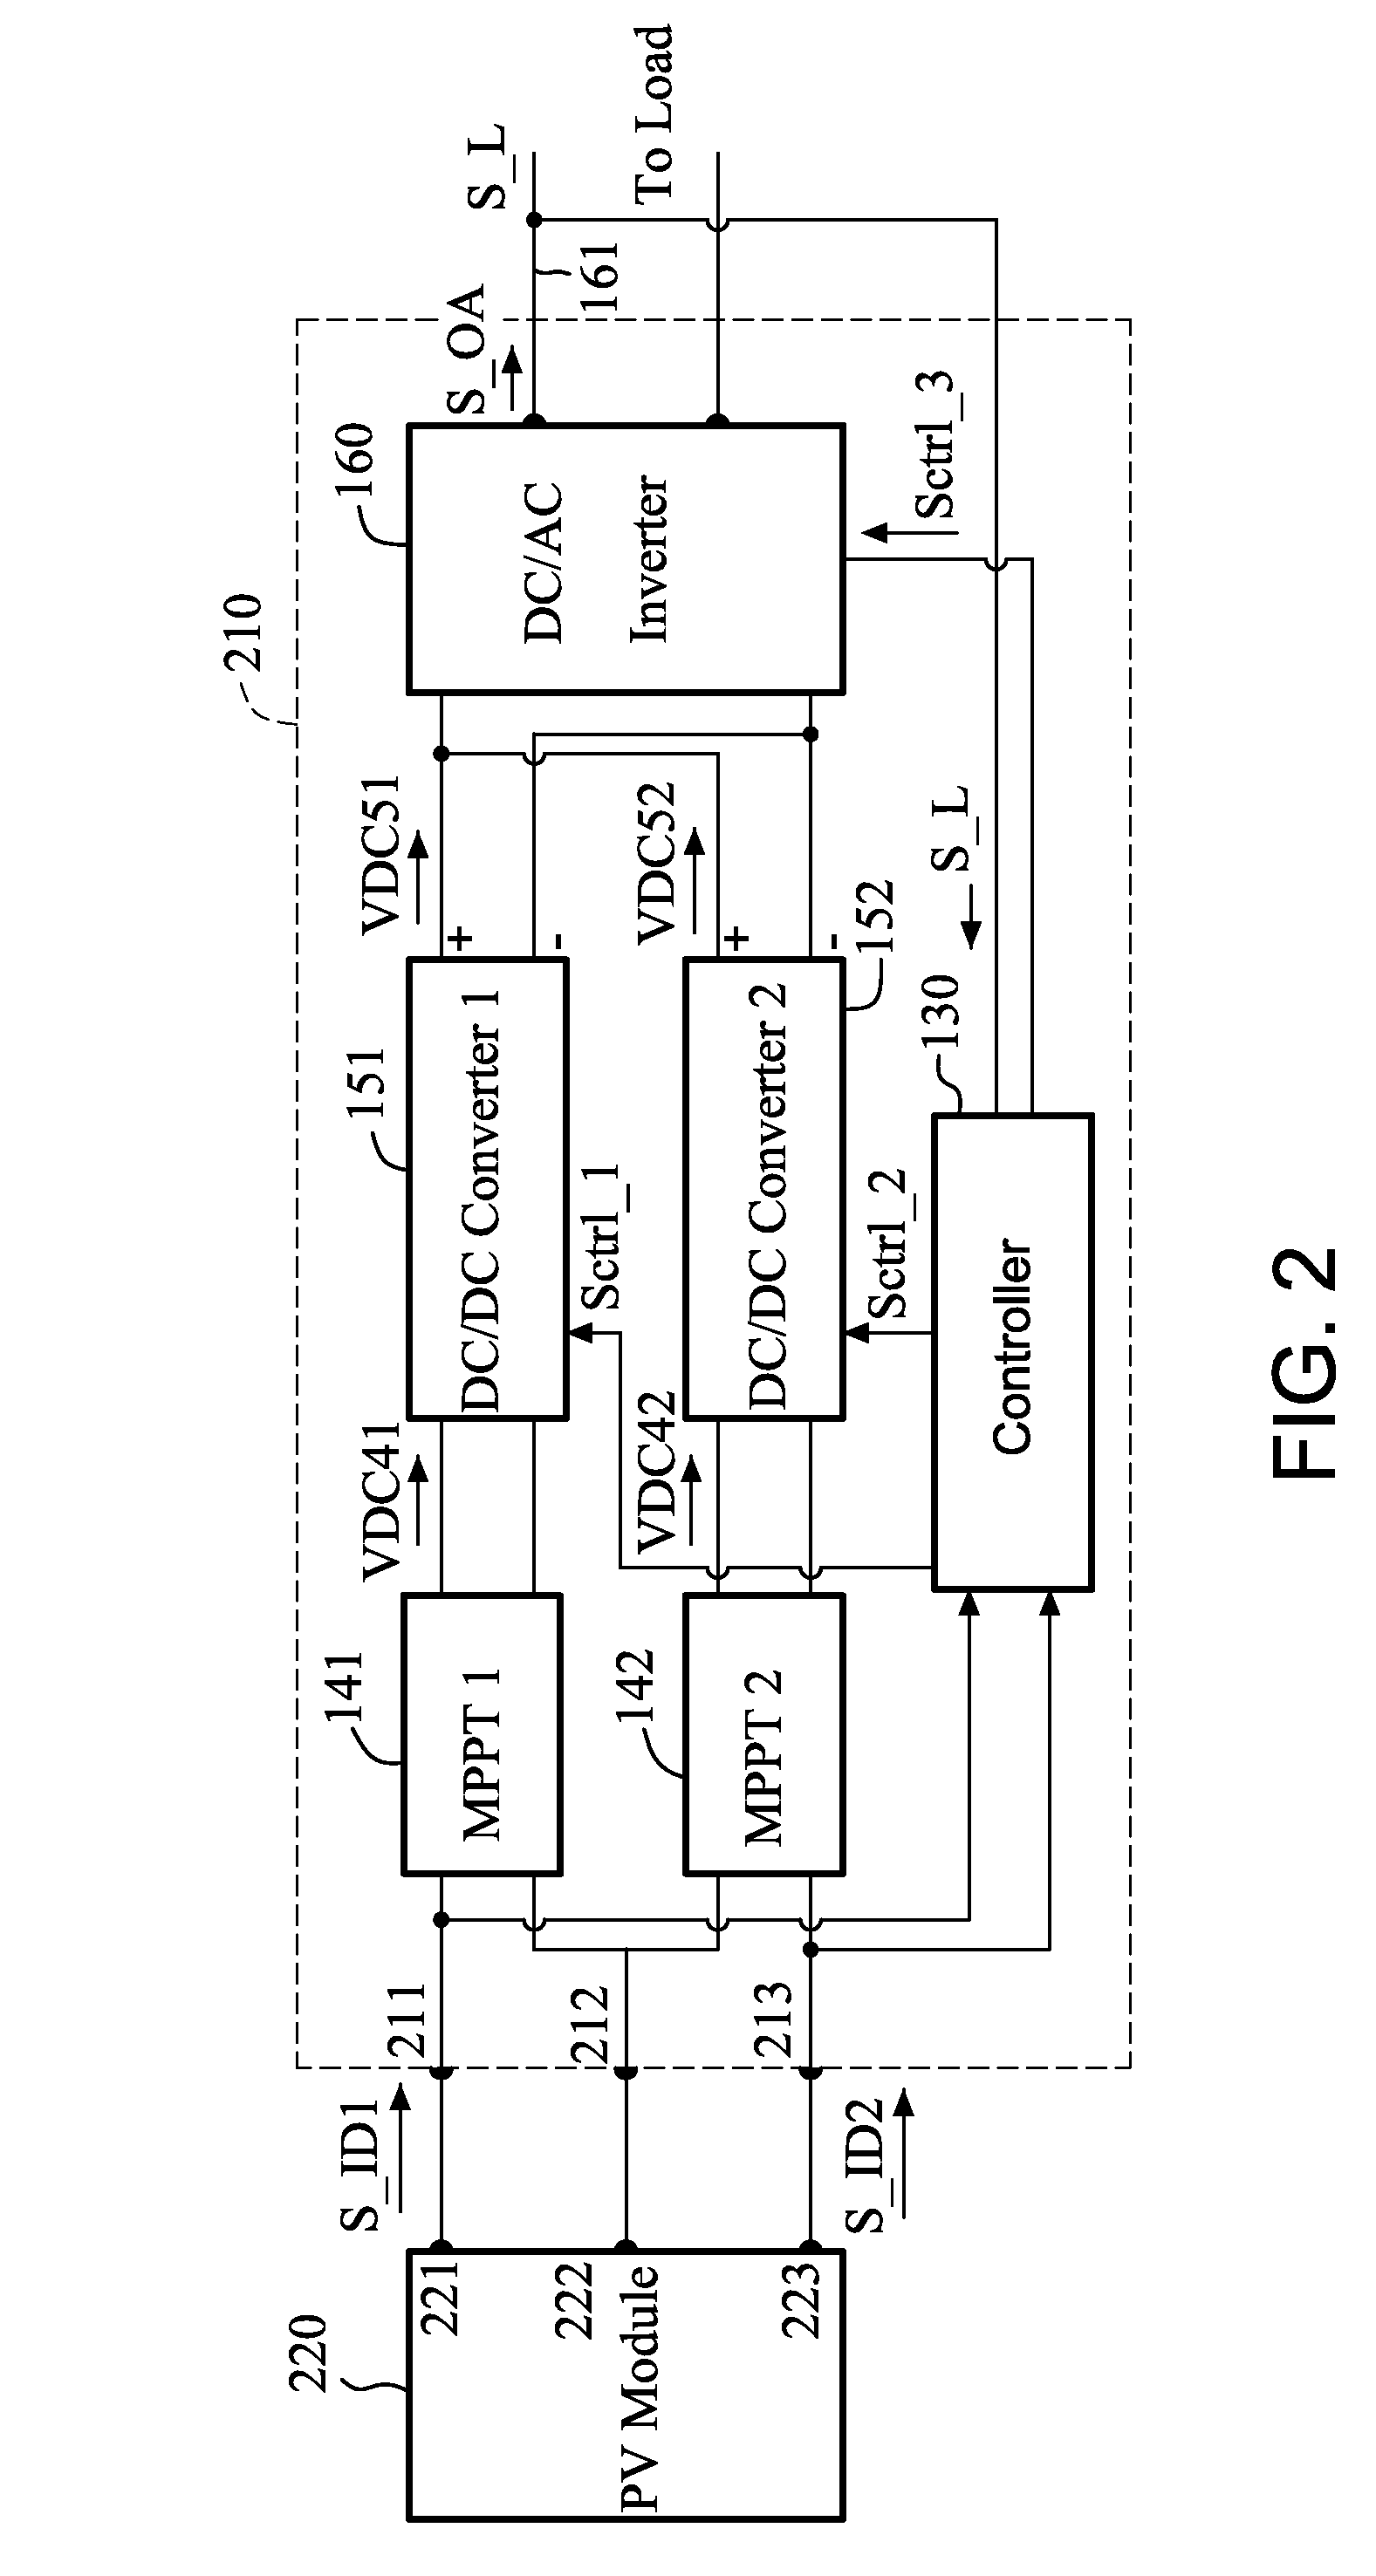 Converting device with multiple input terminals and two output terminals and photovoltaic system employing the same